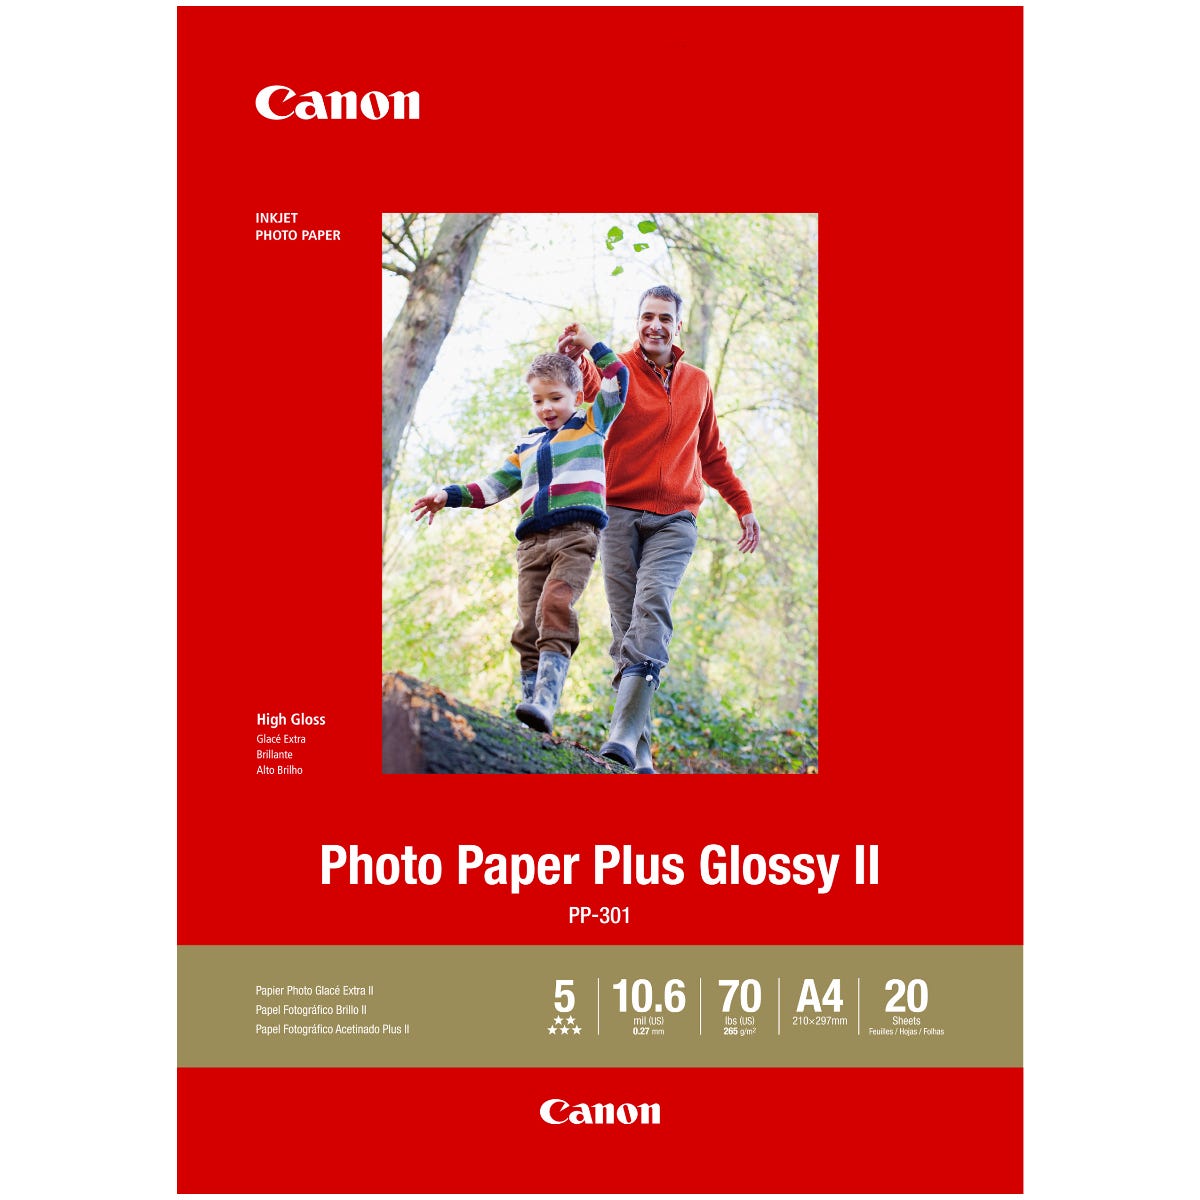 Canon A4 Glossy Photo Paper Plus II 265GSM CPP301A4 (20PK) - The Printer Clinic